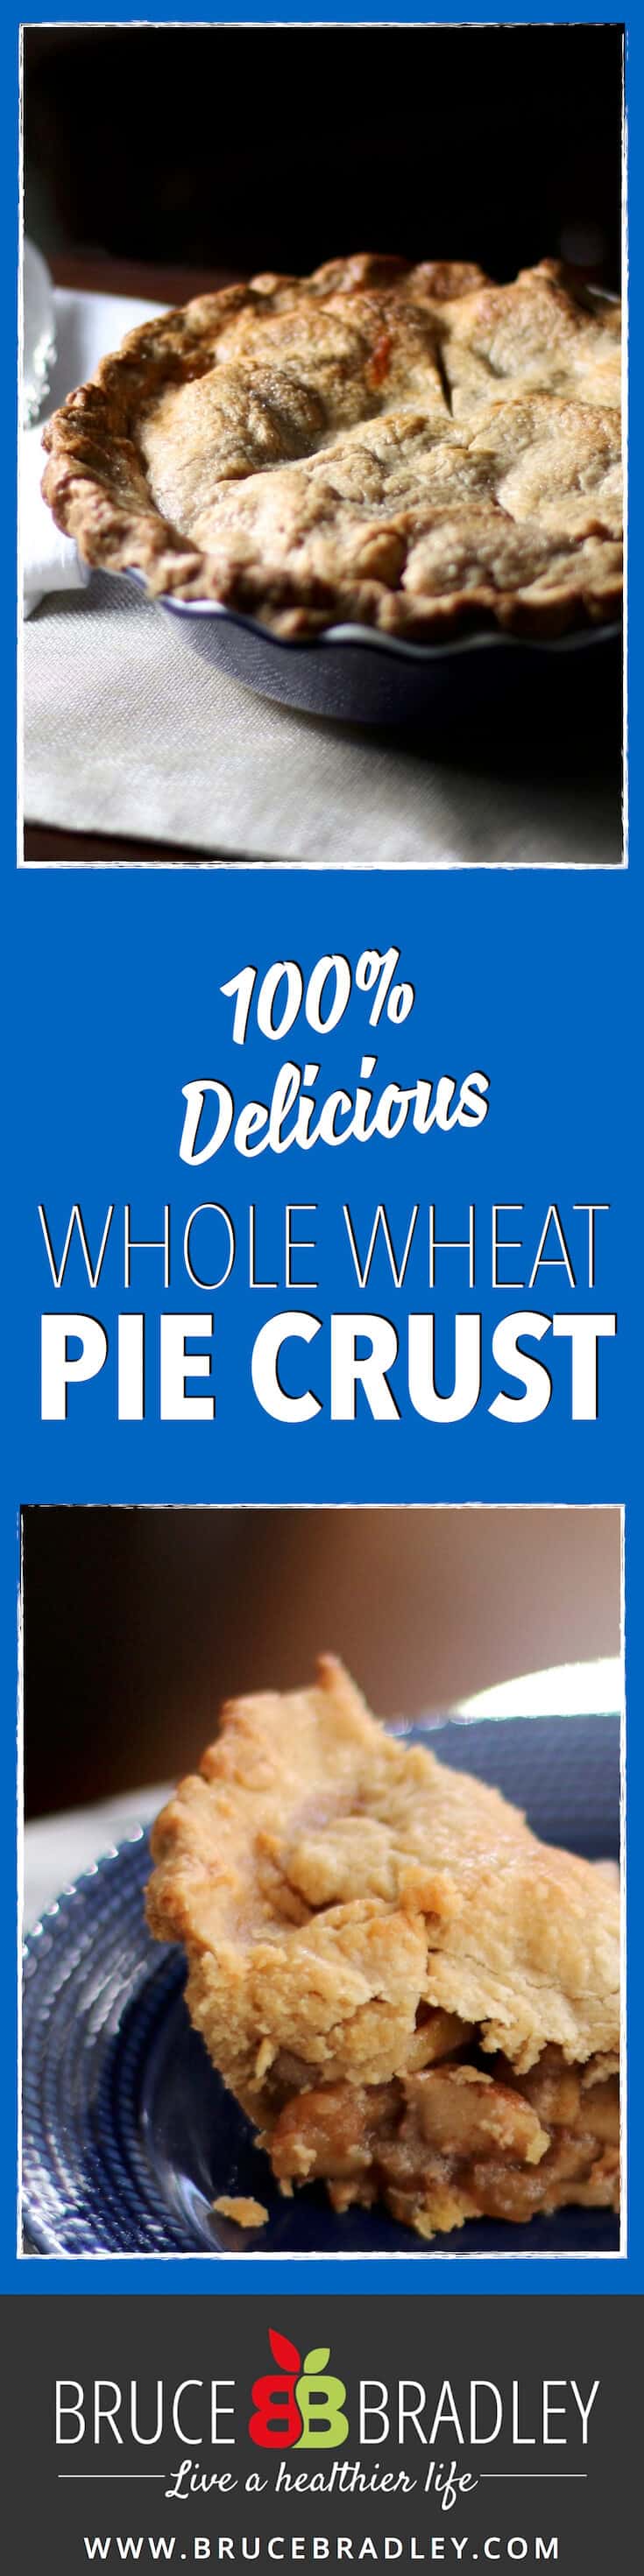 What'S In Your Store-Bought Pie Crust? It'S Pretty Scary. Ditch The Trans Fats, Preservatives, And Added Colors, And Try My 100% Delicious Whole Wheat Pie Crust Instead! It'S Simply Amazing And Easy To Make Ahead Of The Big Holiday Rush!